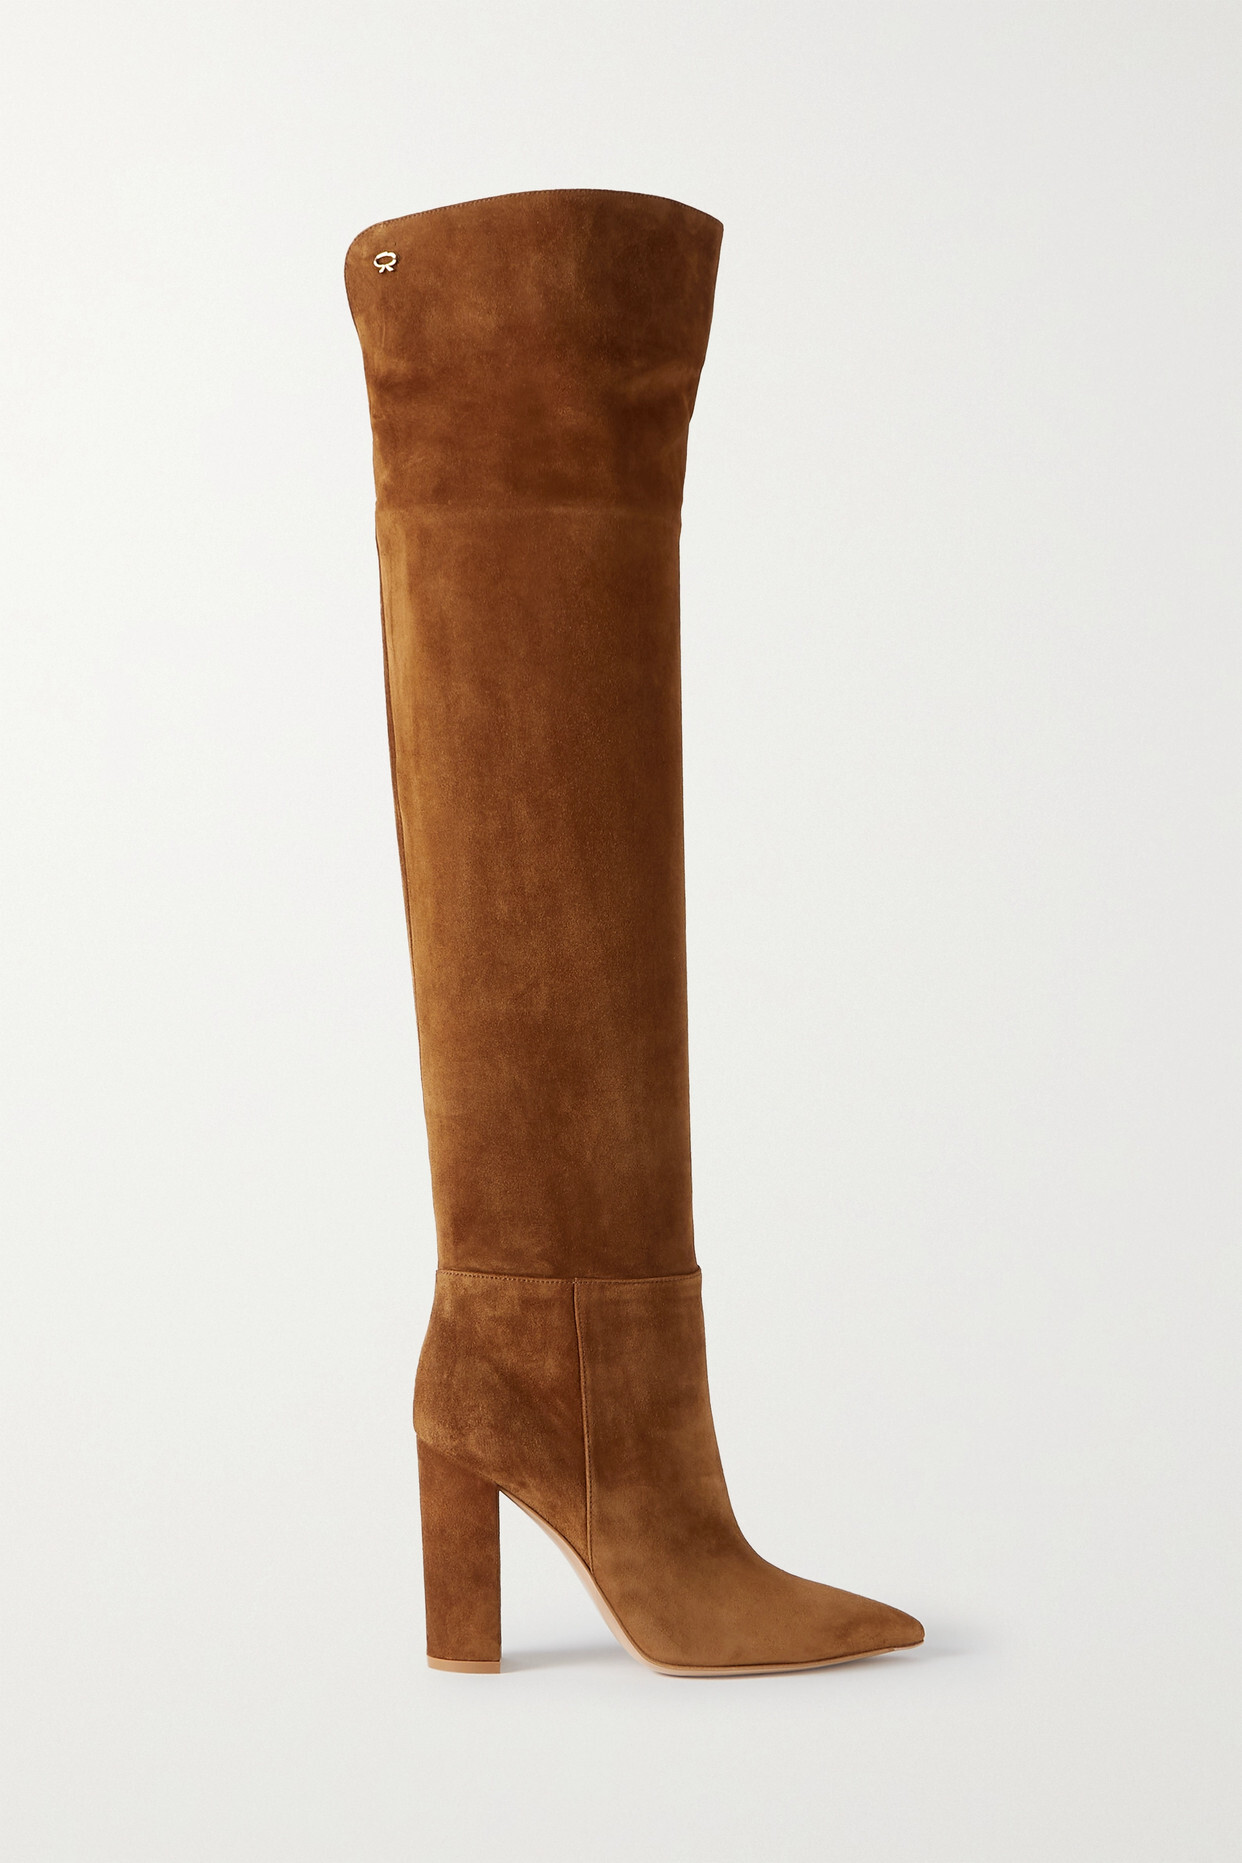 Gianvito Rossi - 100 Suede Over-the-knee Boots - Brown